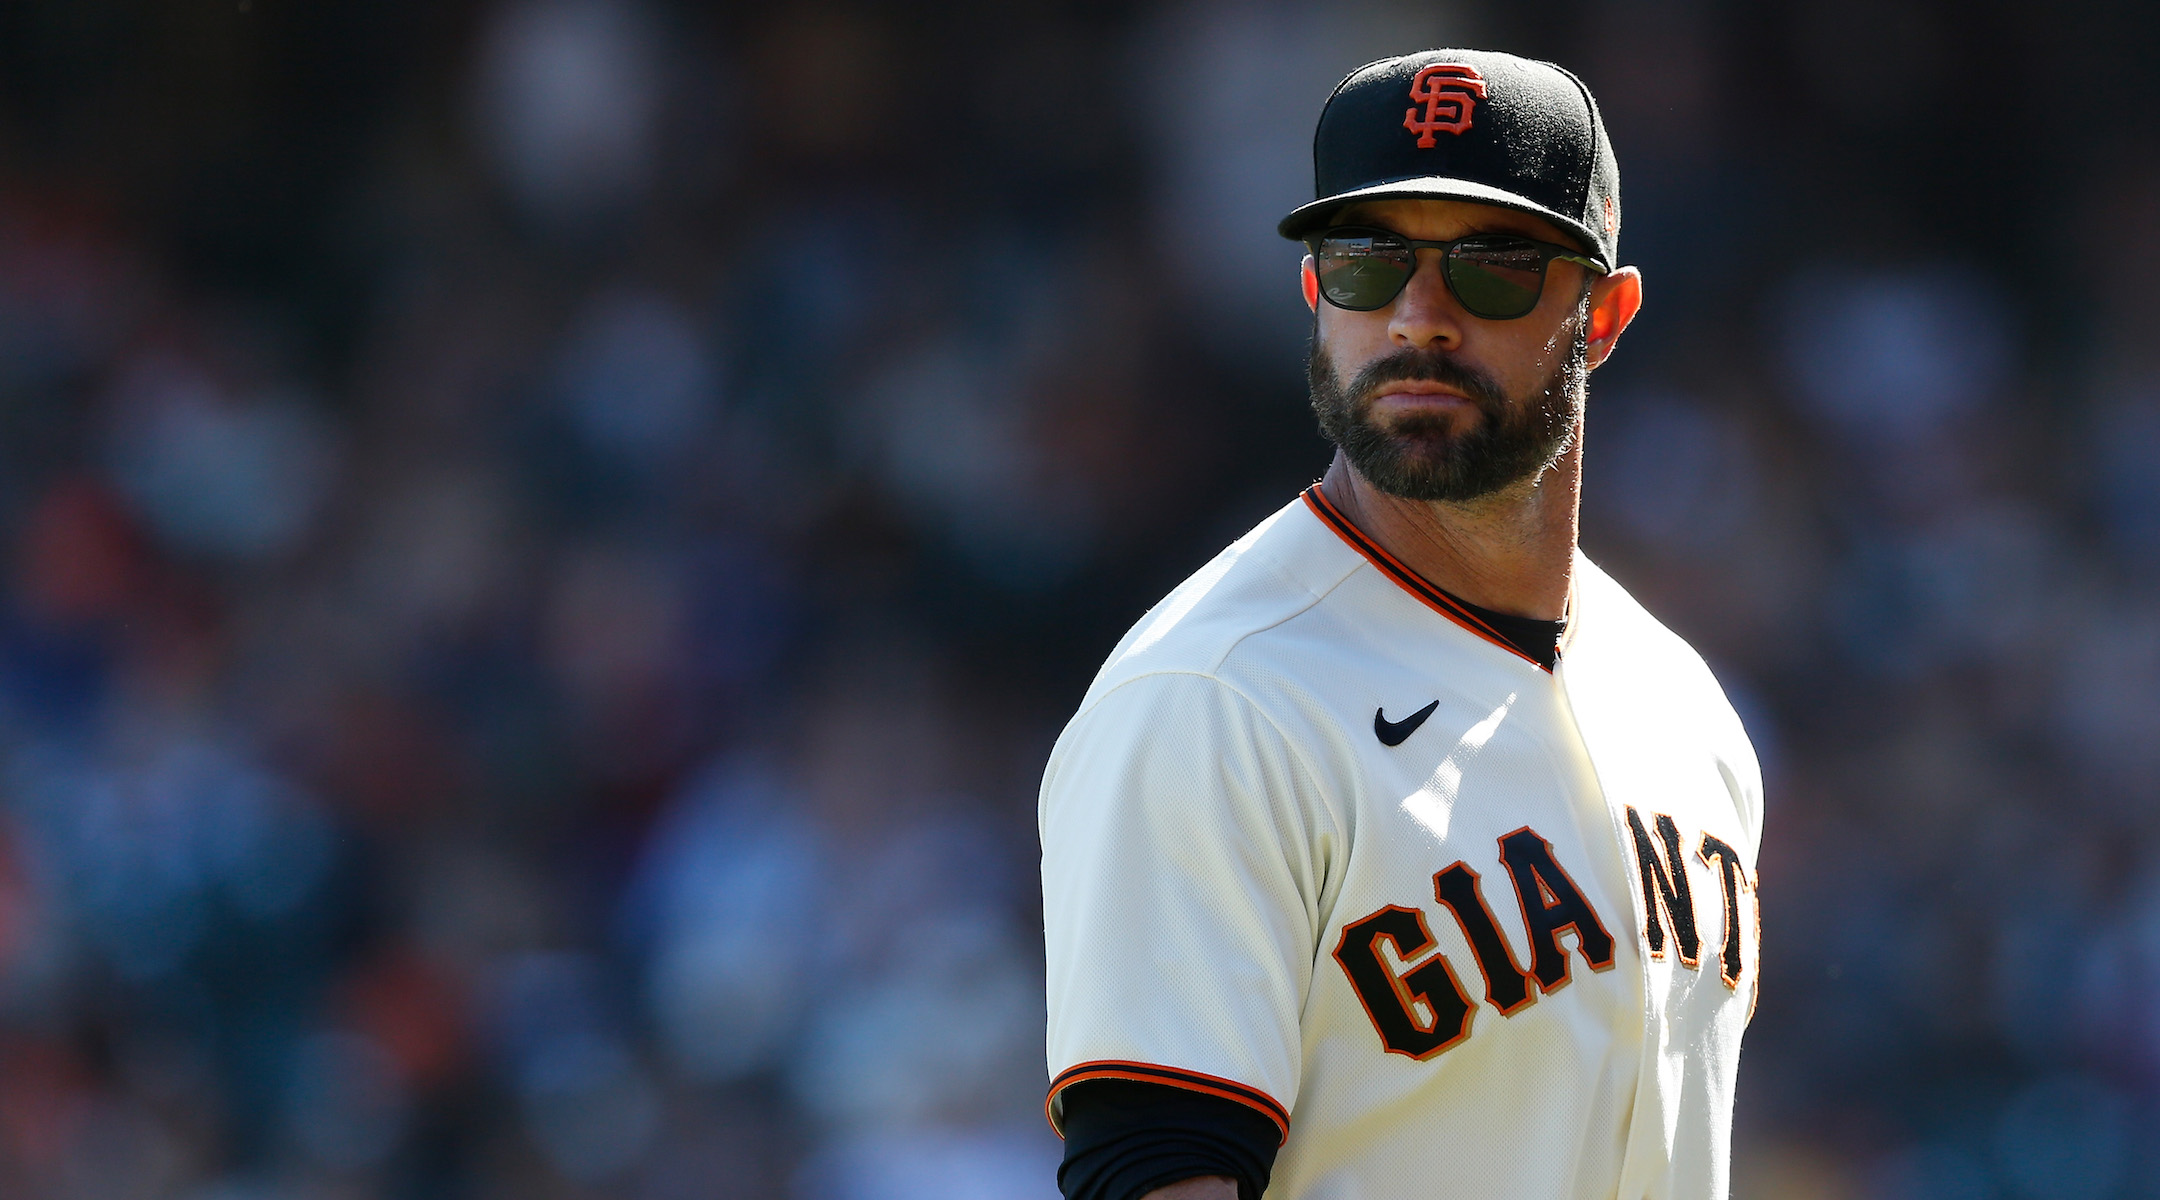 MLB on X: The first squad in the postseason? The @SFGiants